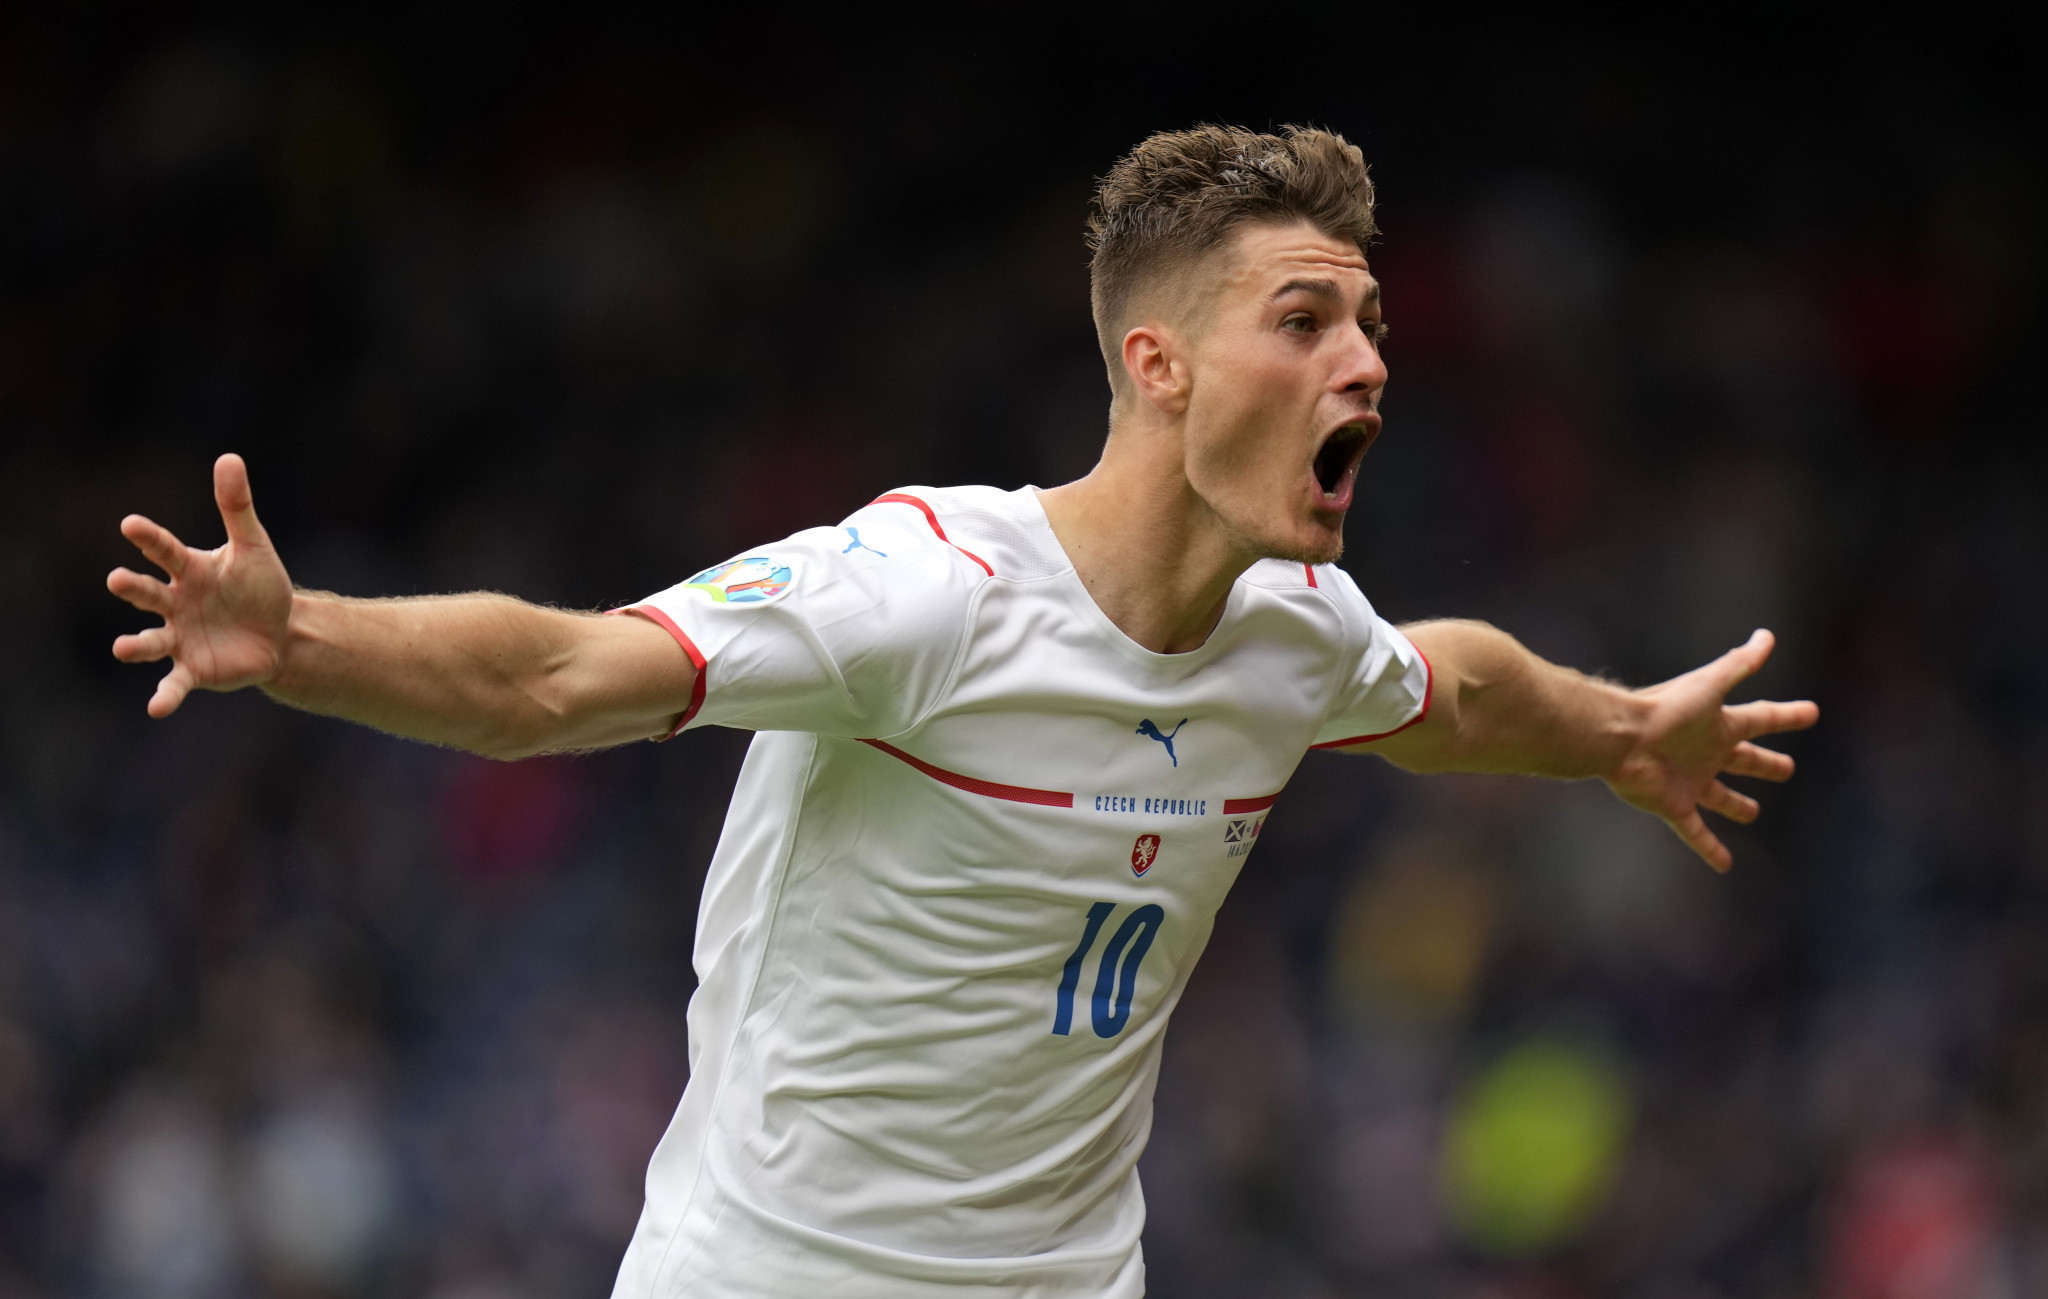 Patrik Schick celebrates scoring his second goal in the Czech Republic's 2-0 victory over Scotland in Glasgow ©Getty Images